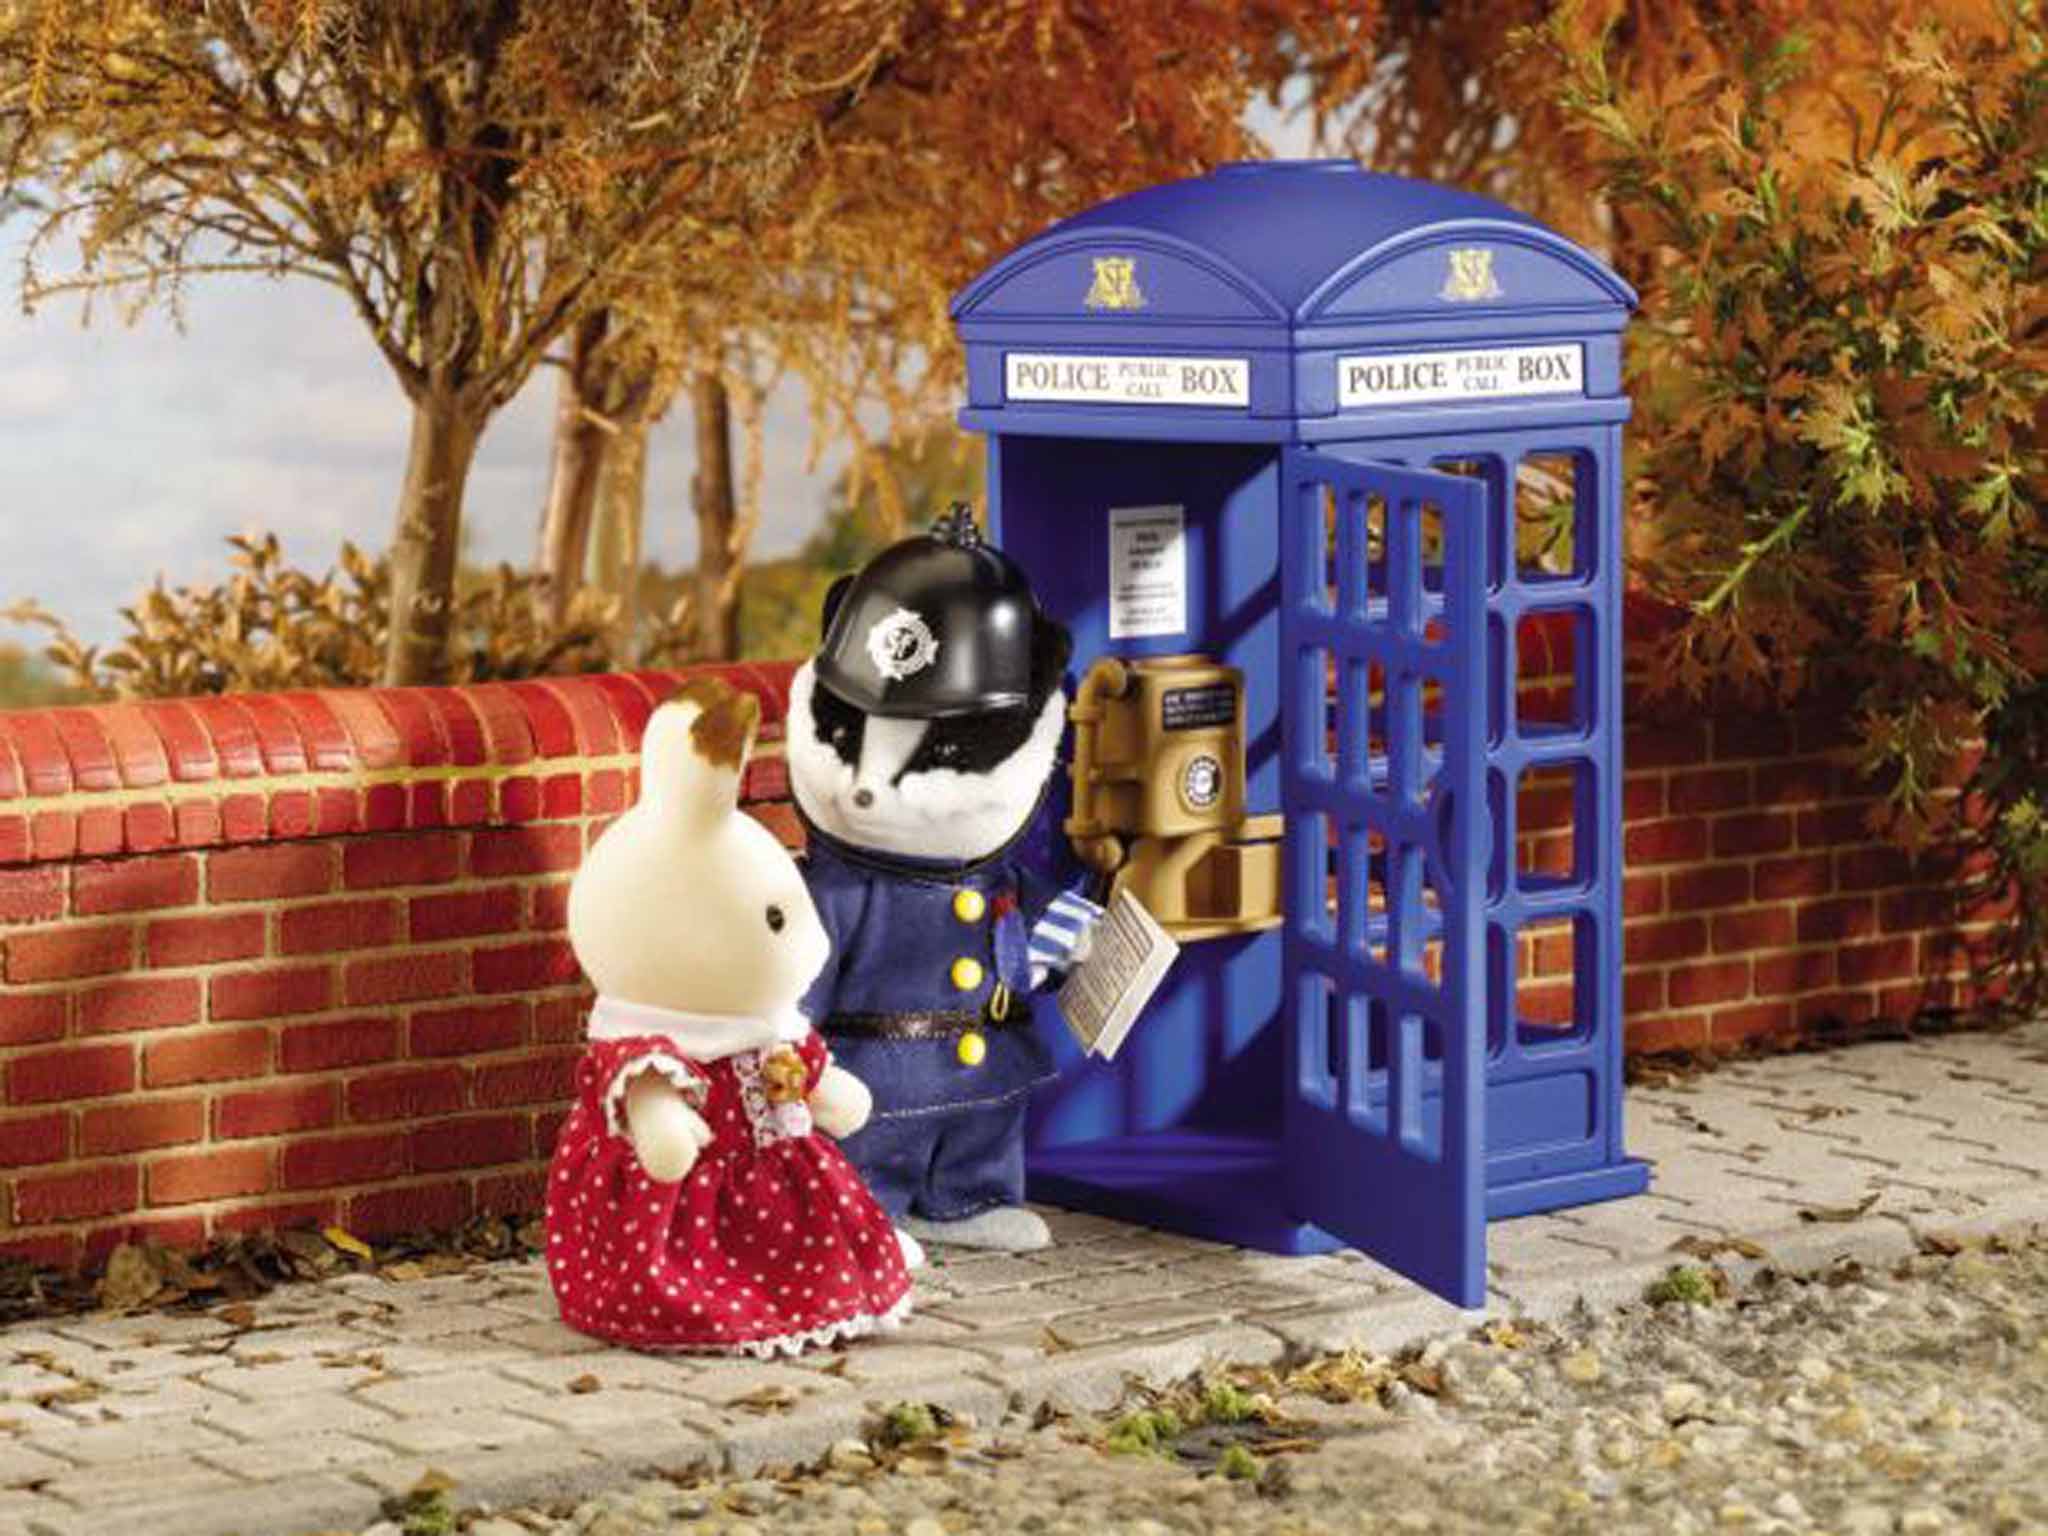 Sylvanian Families: How folksy ways and wholesome values captured